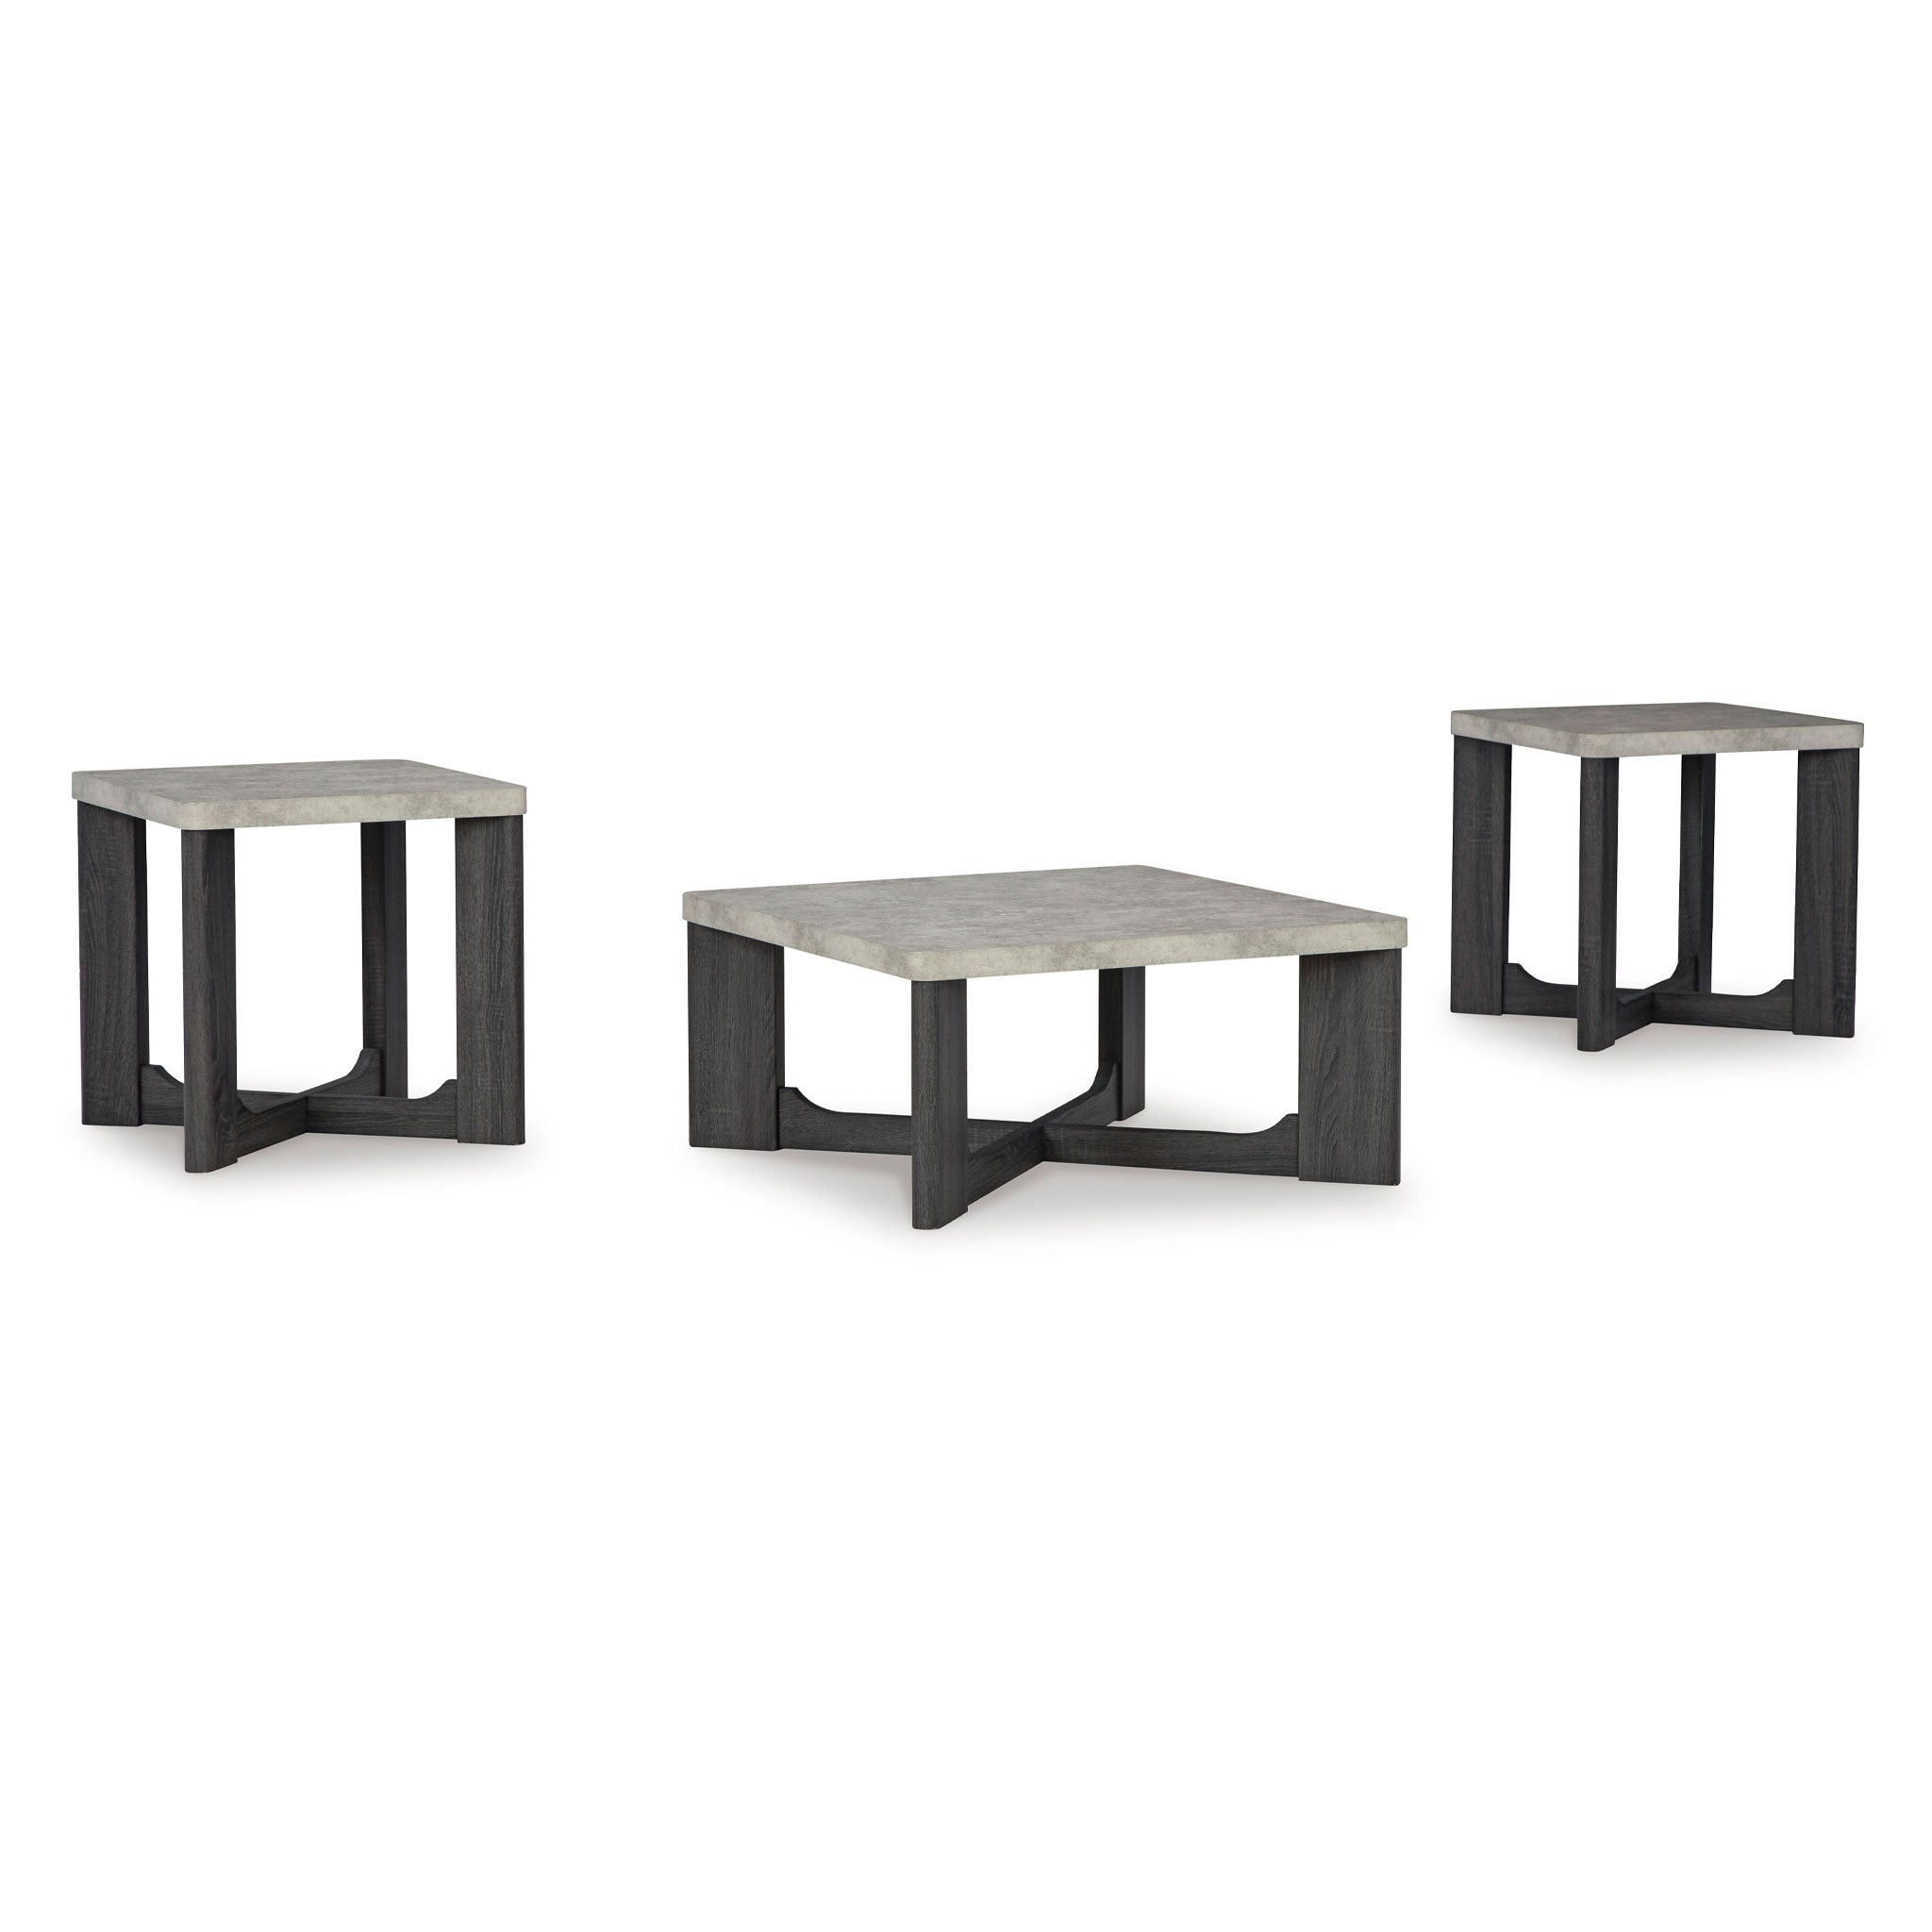 Sharstorm Occasional Table Set (set of 3)